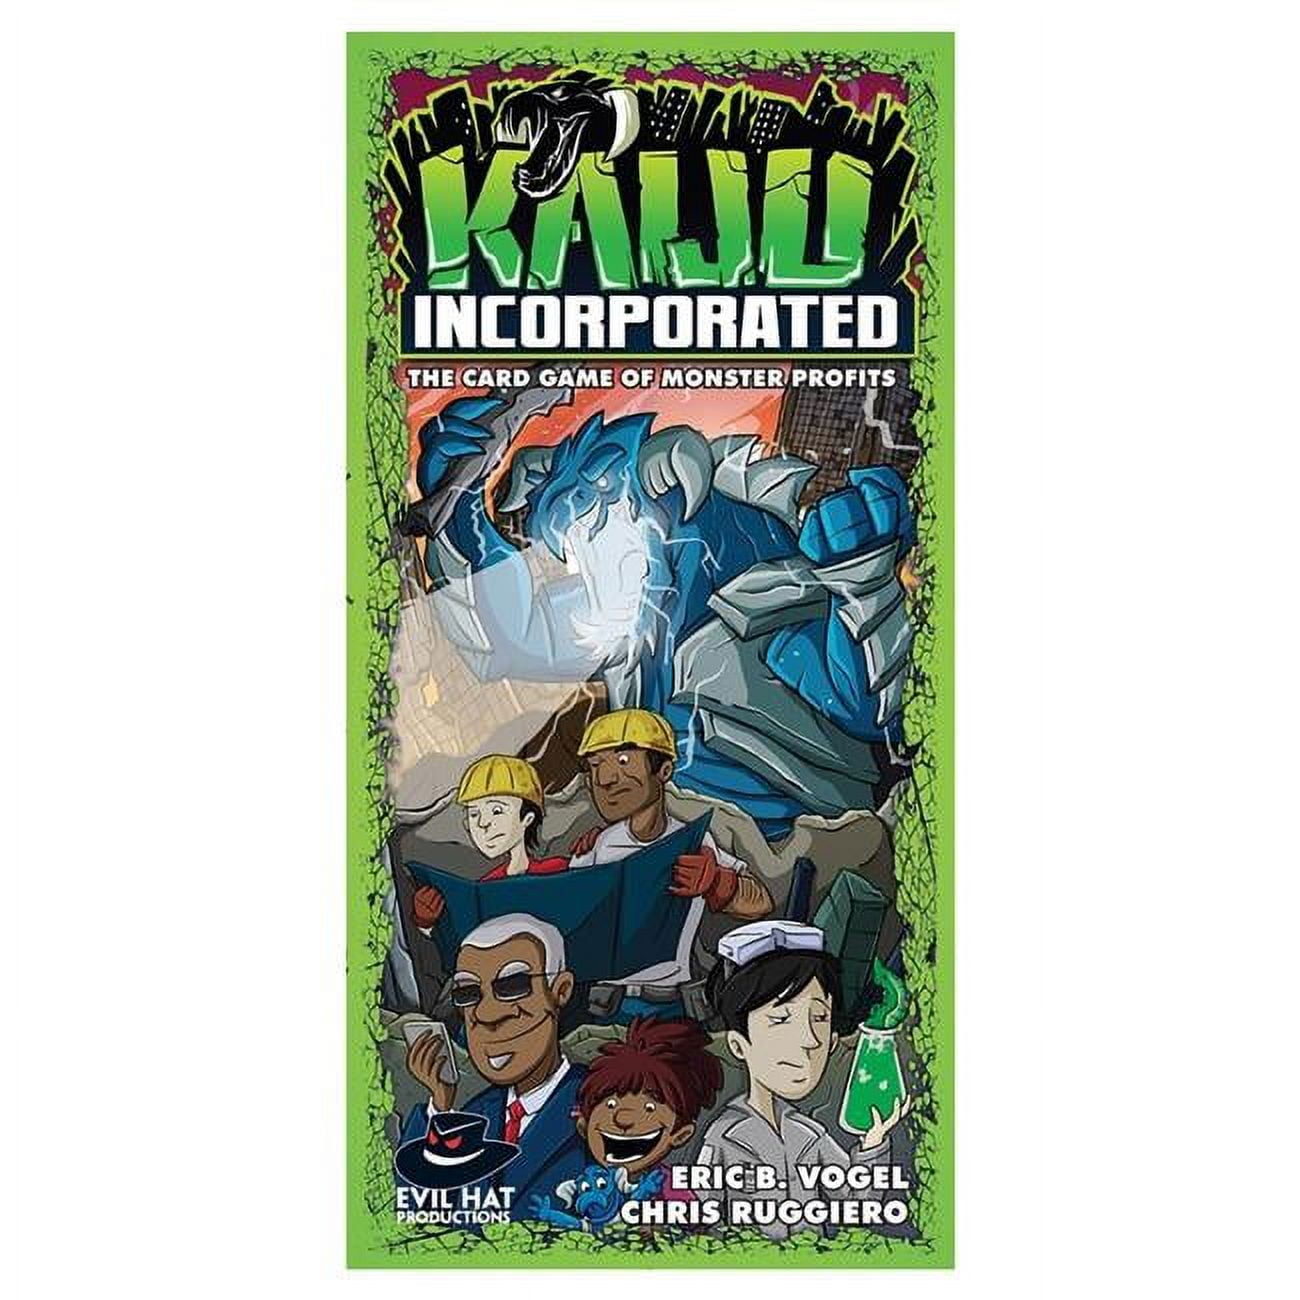 Ehp0026 Kaiju Incorporated - The Card Game